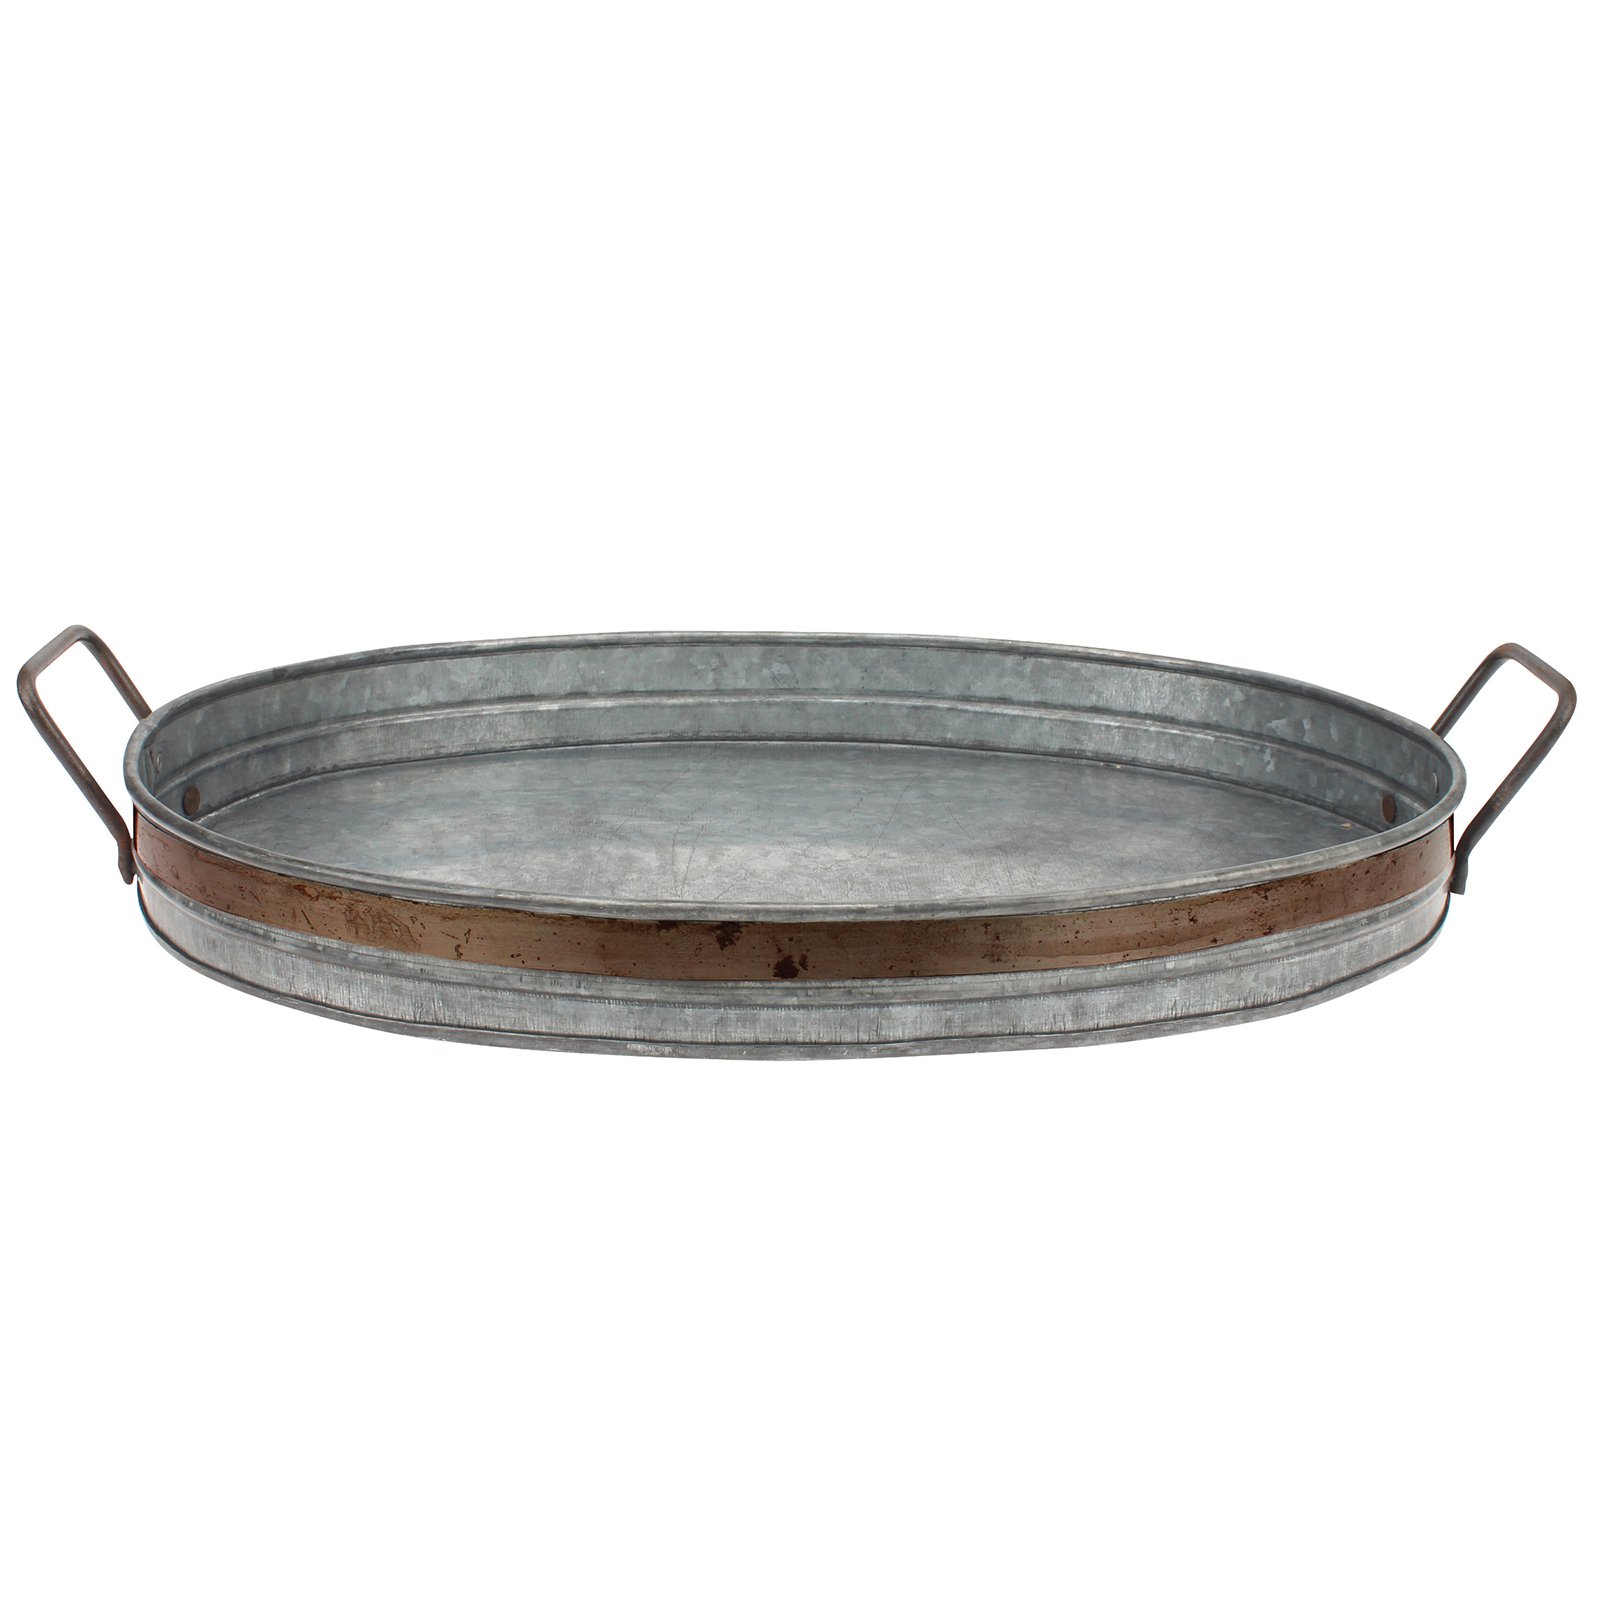 Stonebriar Aged Galvanized Tray With Handlescome explore interior design inspiration for modern farmhouse and modern country style interiors with this round up of rustic lovely decor! 